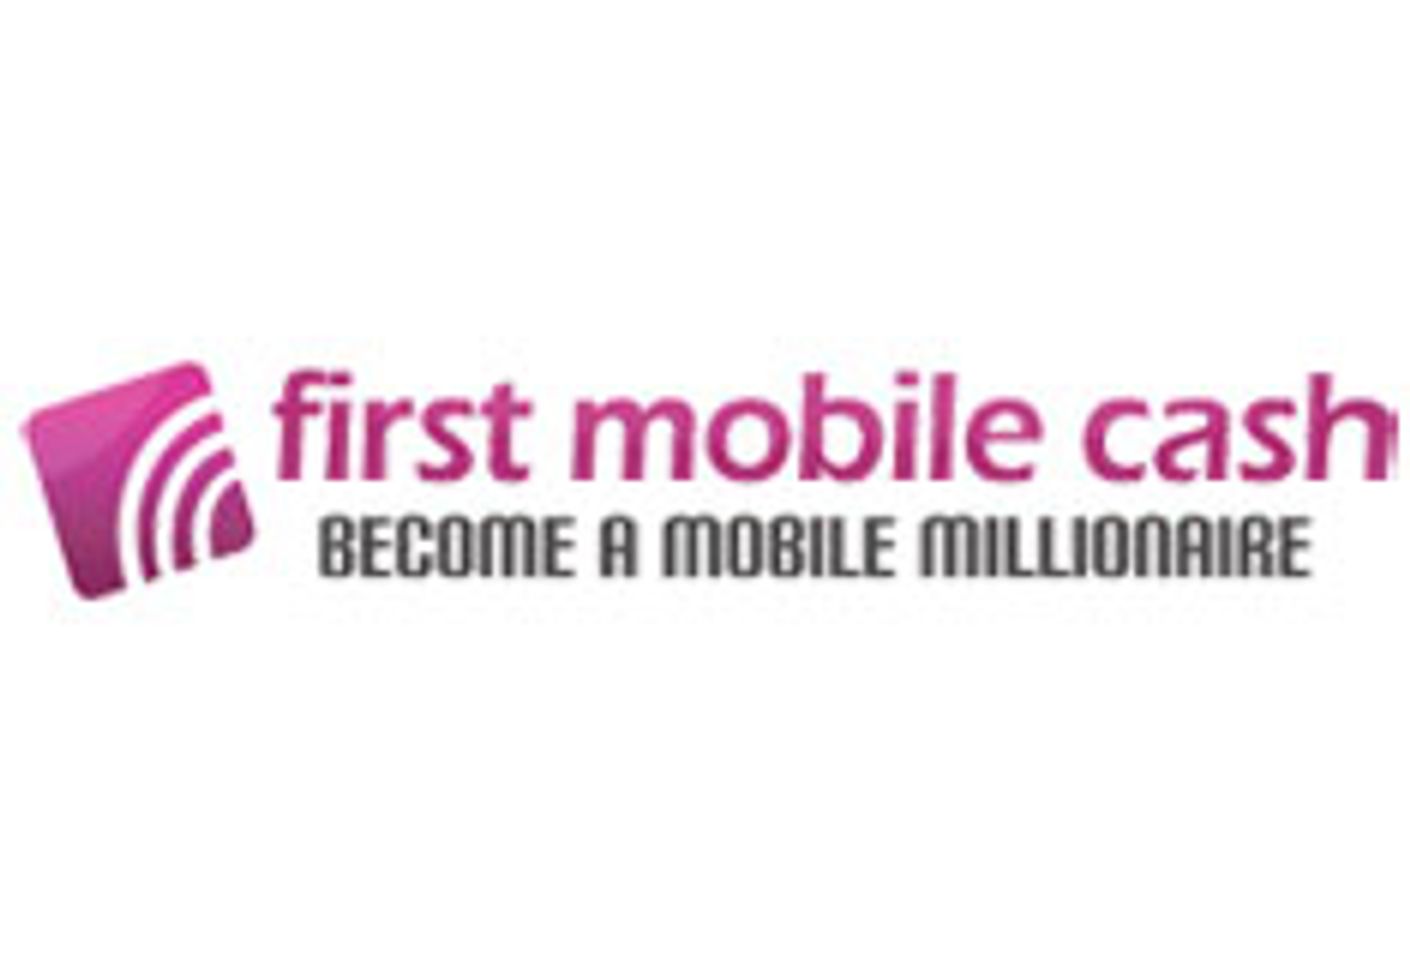 First Mobile Cash to Sponsor The European Summit for Fourth Year